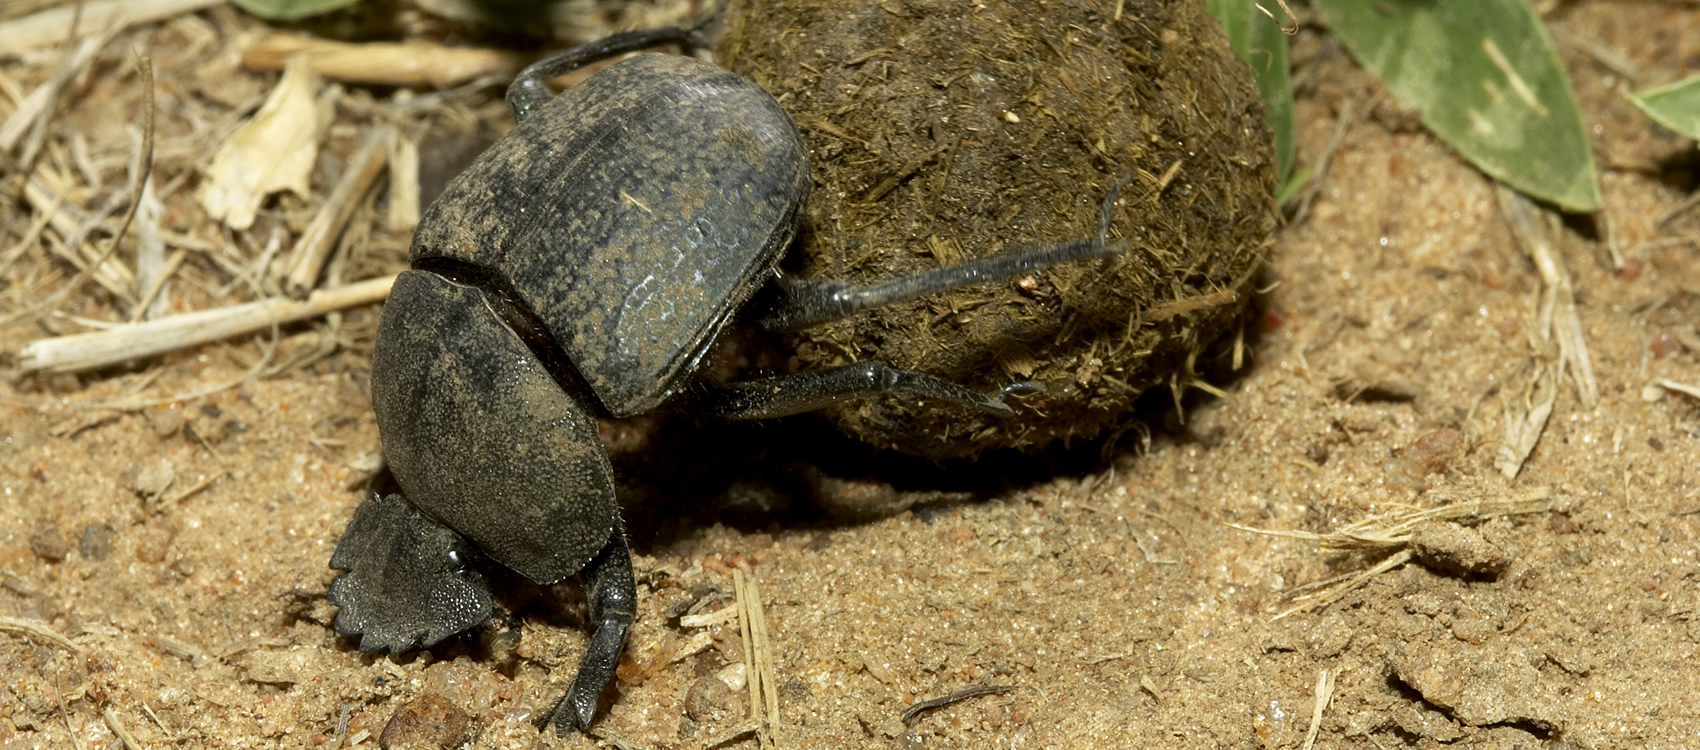 dung beetle rolling a ball of dung